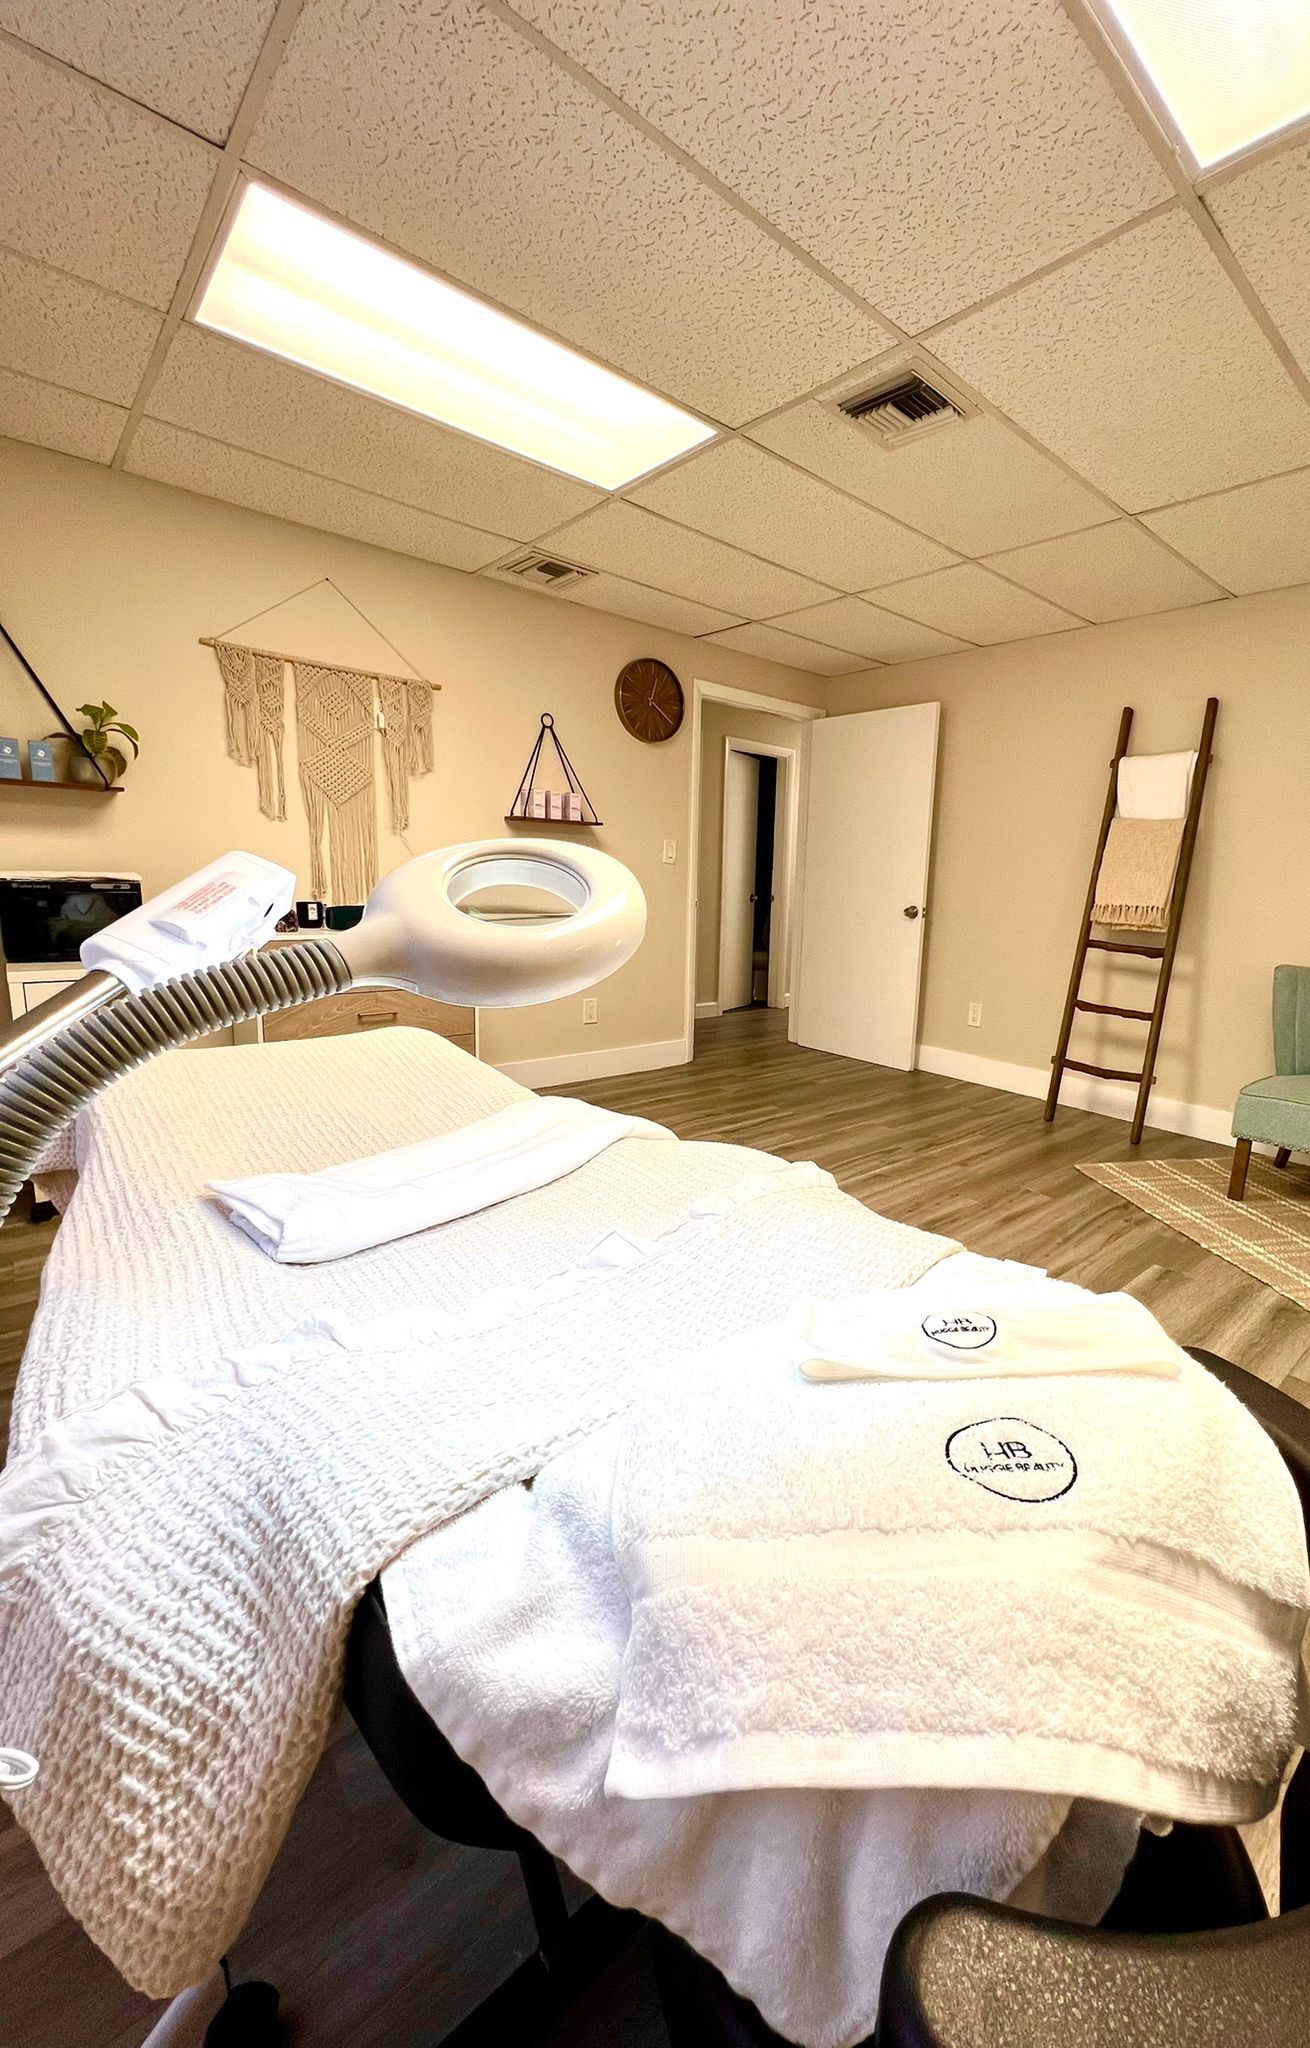 Hollywood Laser Hair Removal Treatment room - Huggie Beauty